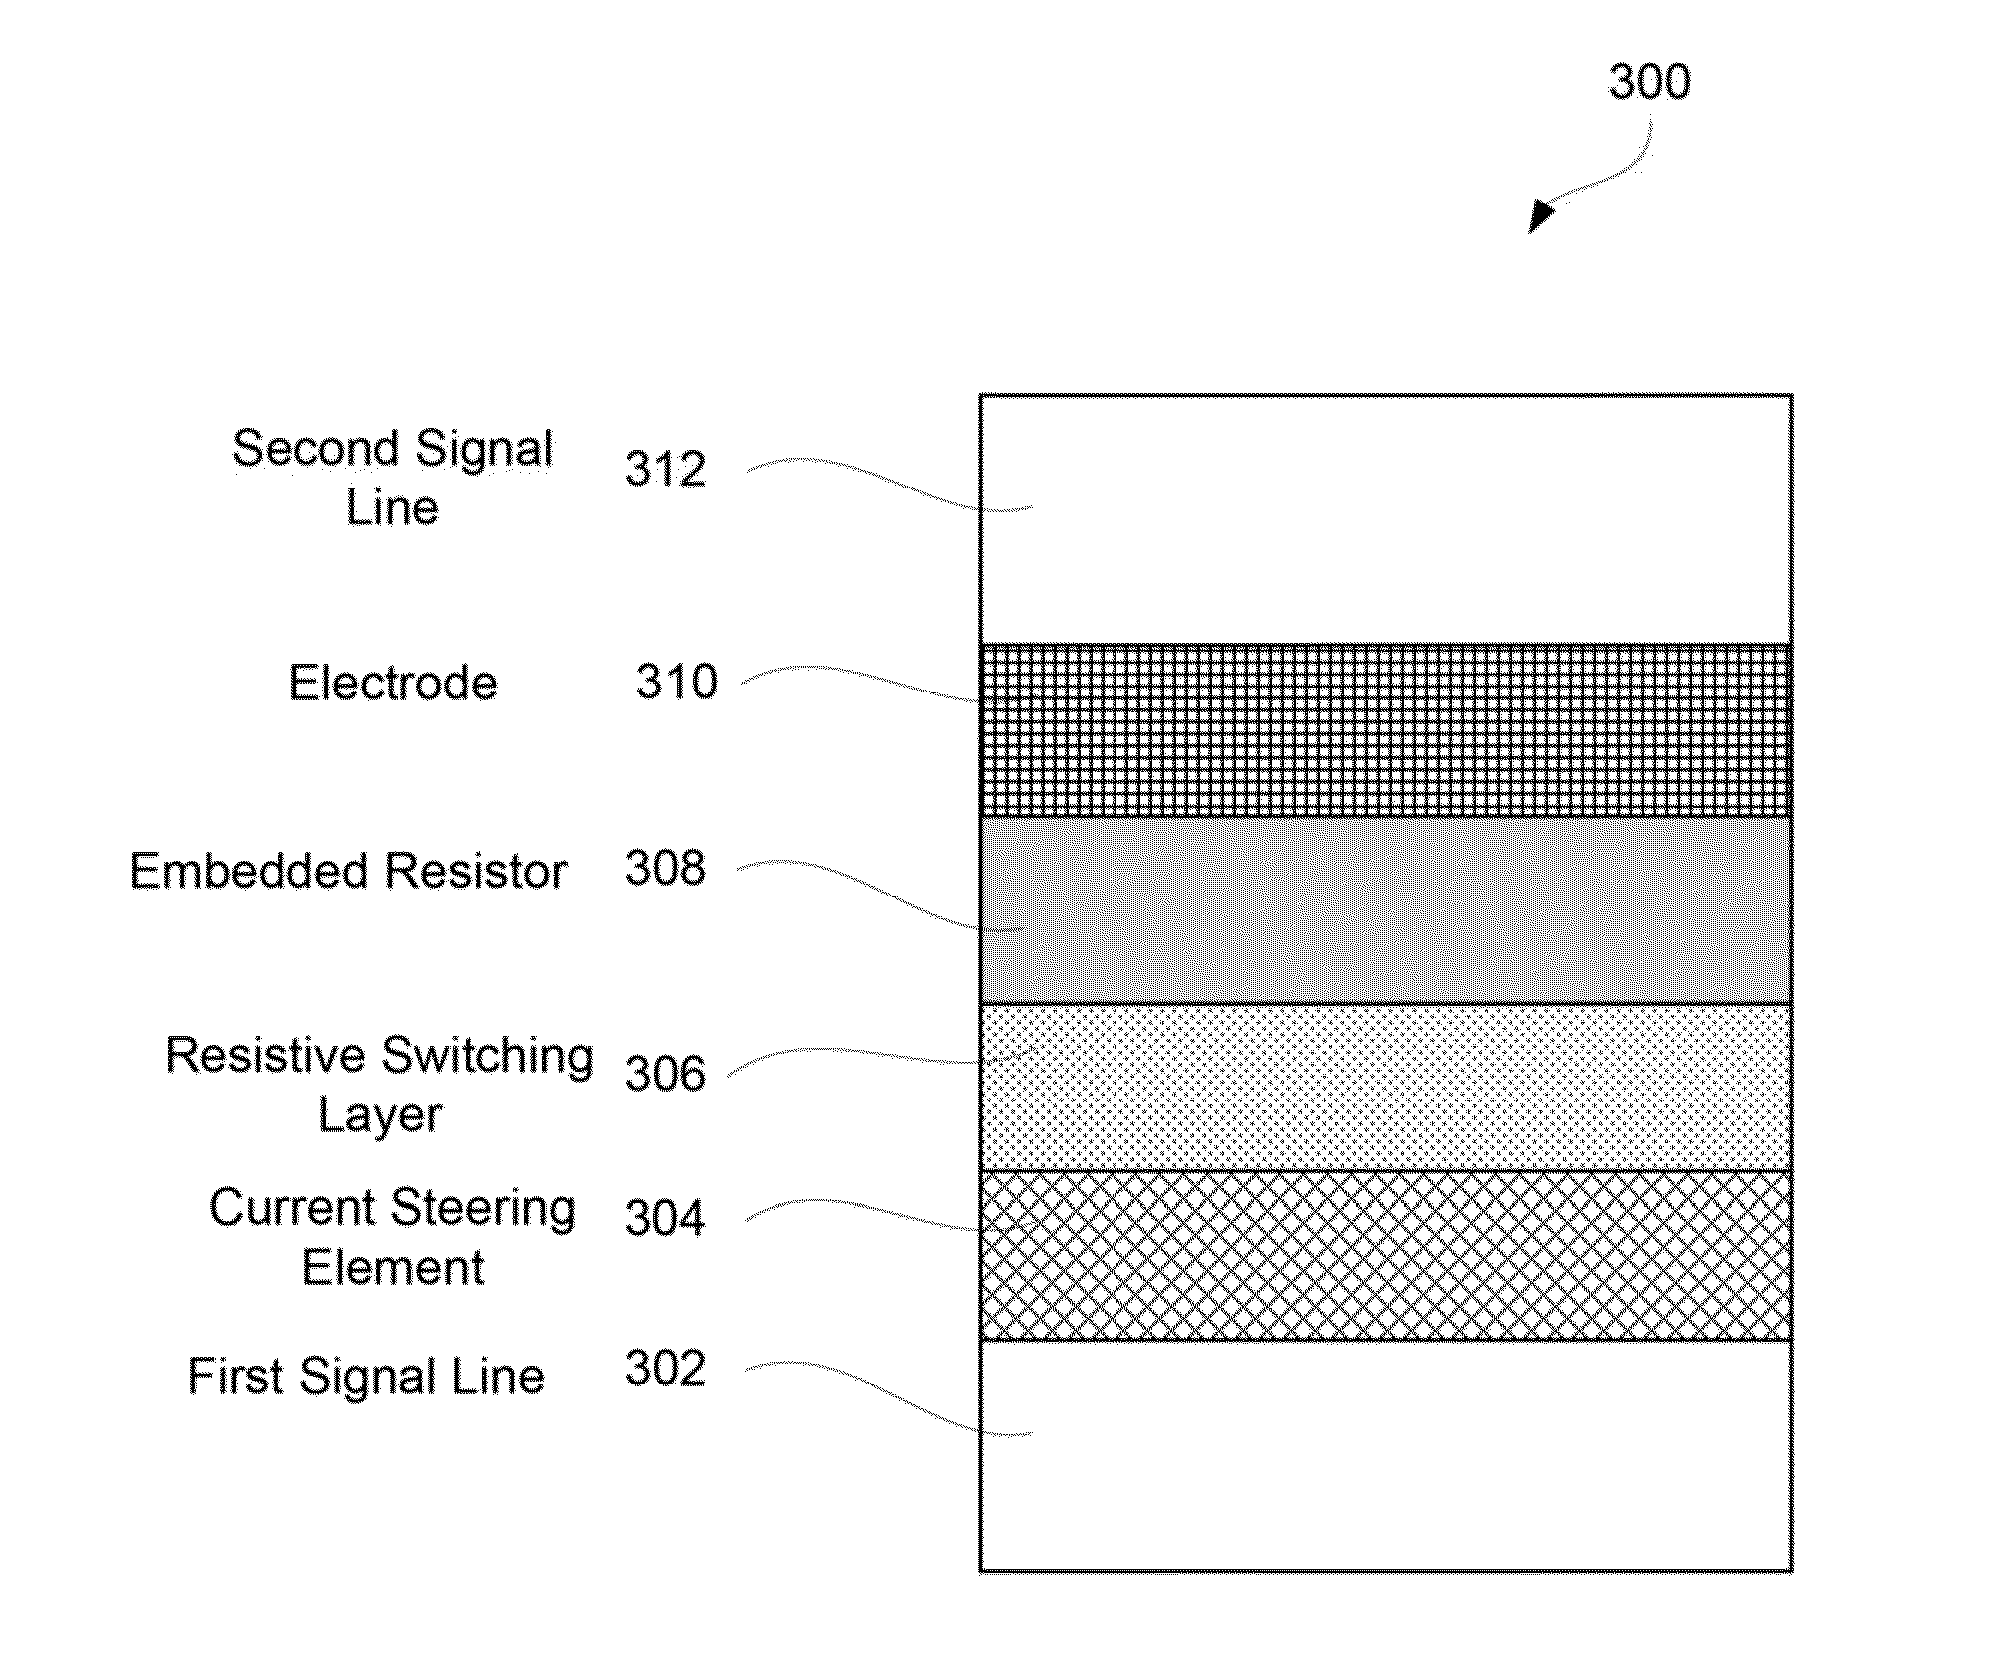 Stacked Bi-layer as the low power switchable RRAM